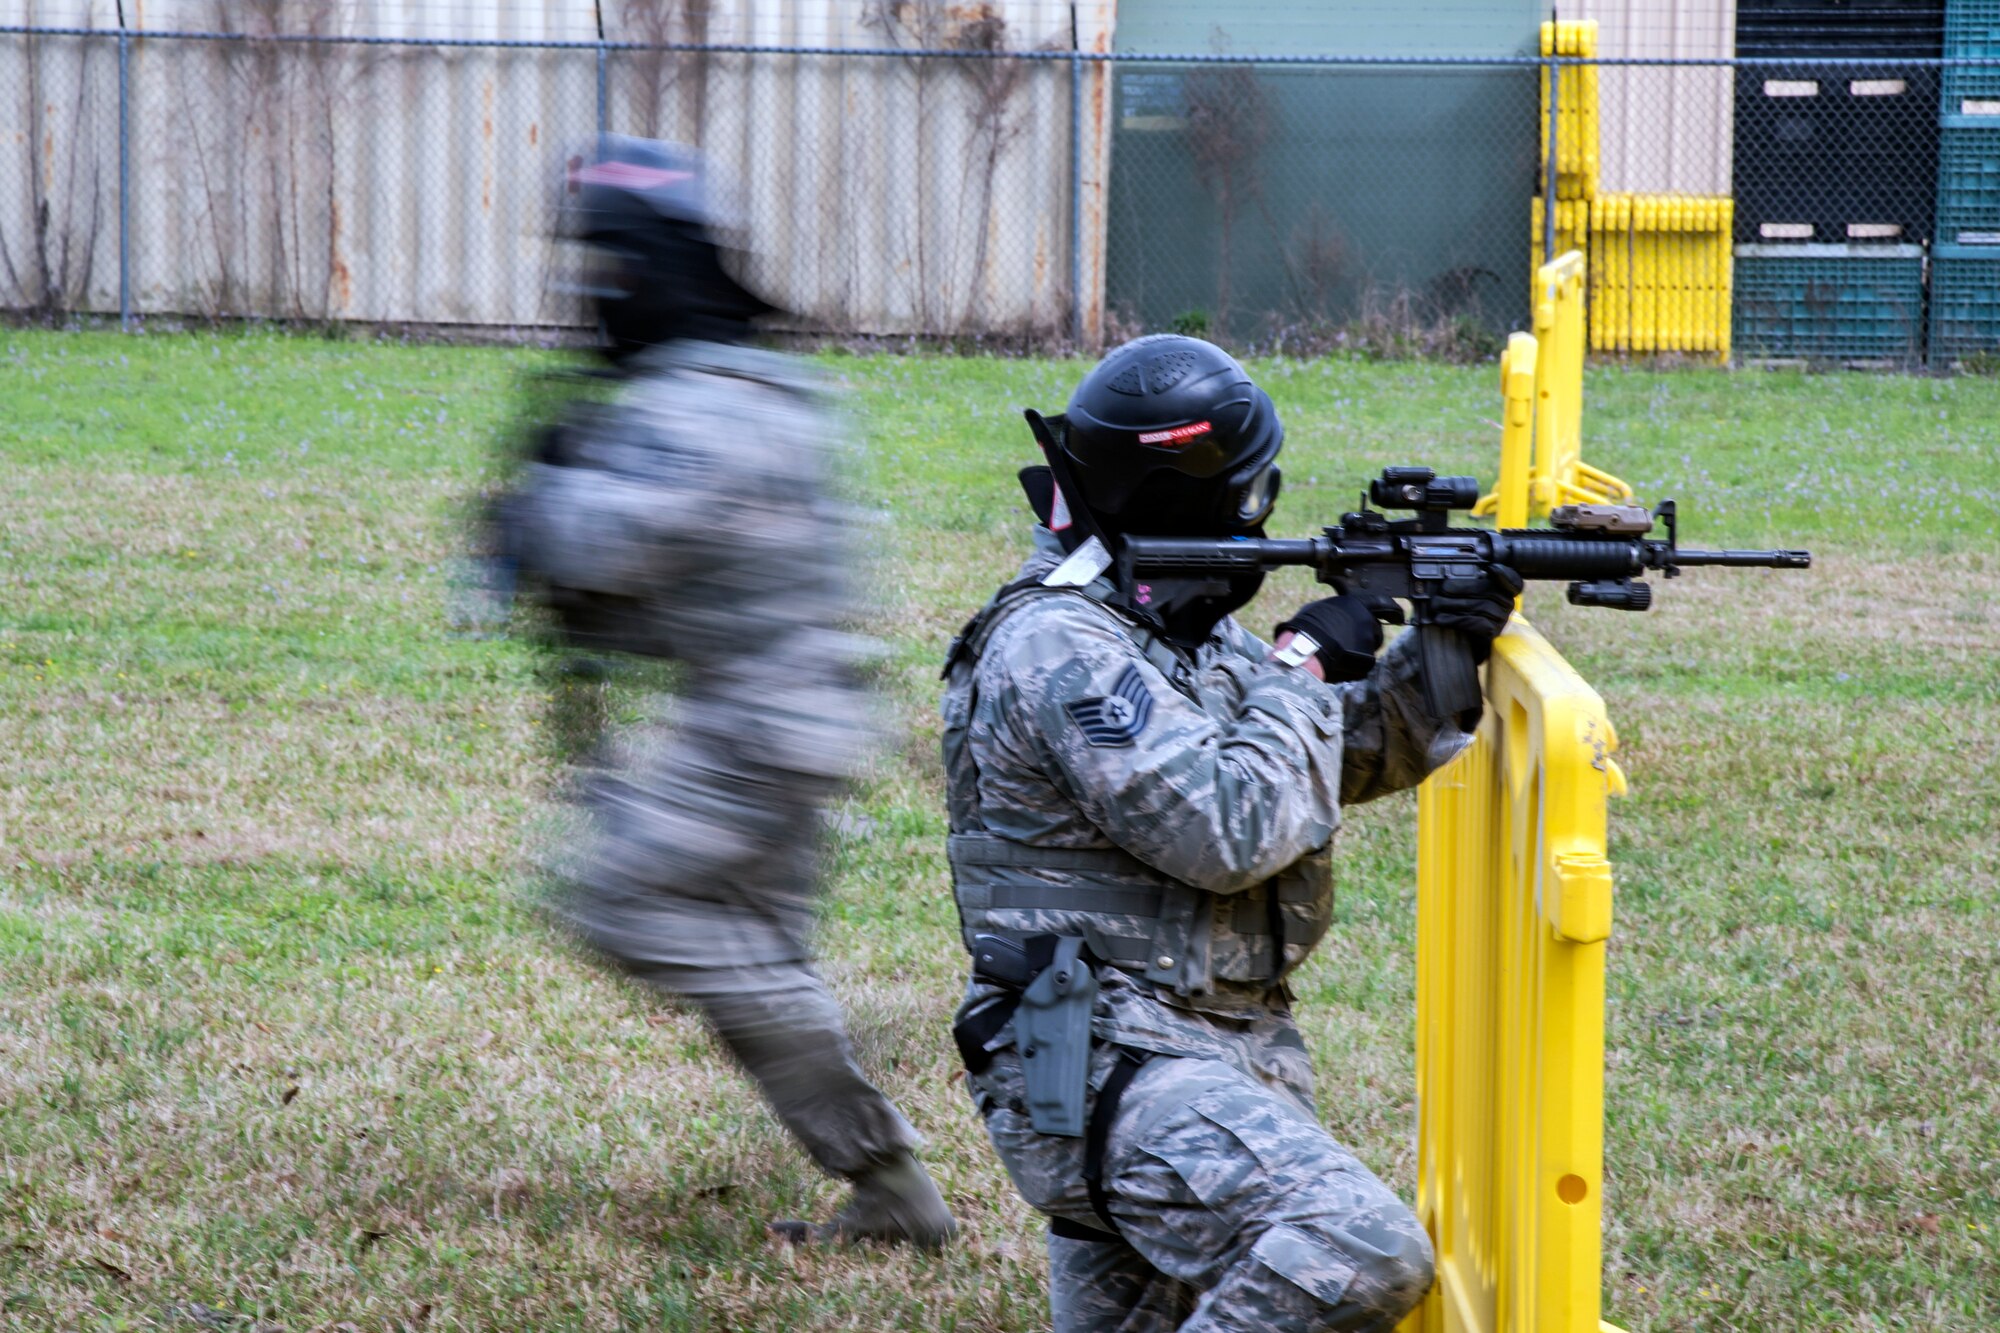 Tech Sgt. Stephen O’Hara, right, 23d Security Forces Squadron flight chief, shoots cover fire for Tech Sgt. Darryl Apiche, 23d Security Forces Squadron kennel master, , Feb. 22, 2018, at Moody Air Force Base, Ga.  The Shoot, move, communicate training event is designed to test participants on their ability to move from barricade to barricade as a team. To be successful, one member provided covering fire while others advanced on the enemy, then retreated from the scenario while they maintained cover fire. Security Forces members could employ these tactics anytime they’re under enemy fire. (U.S. Air Force photo by Airman Eugene Oliver)